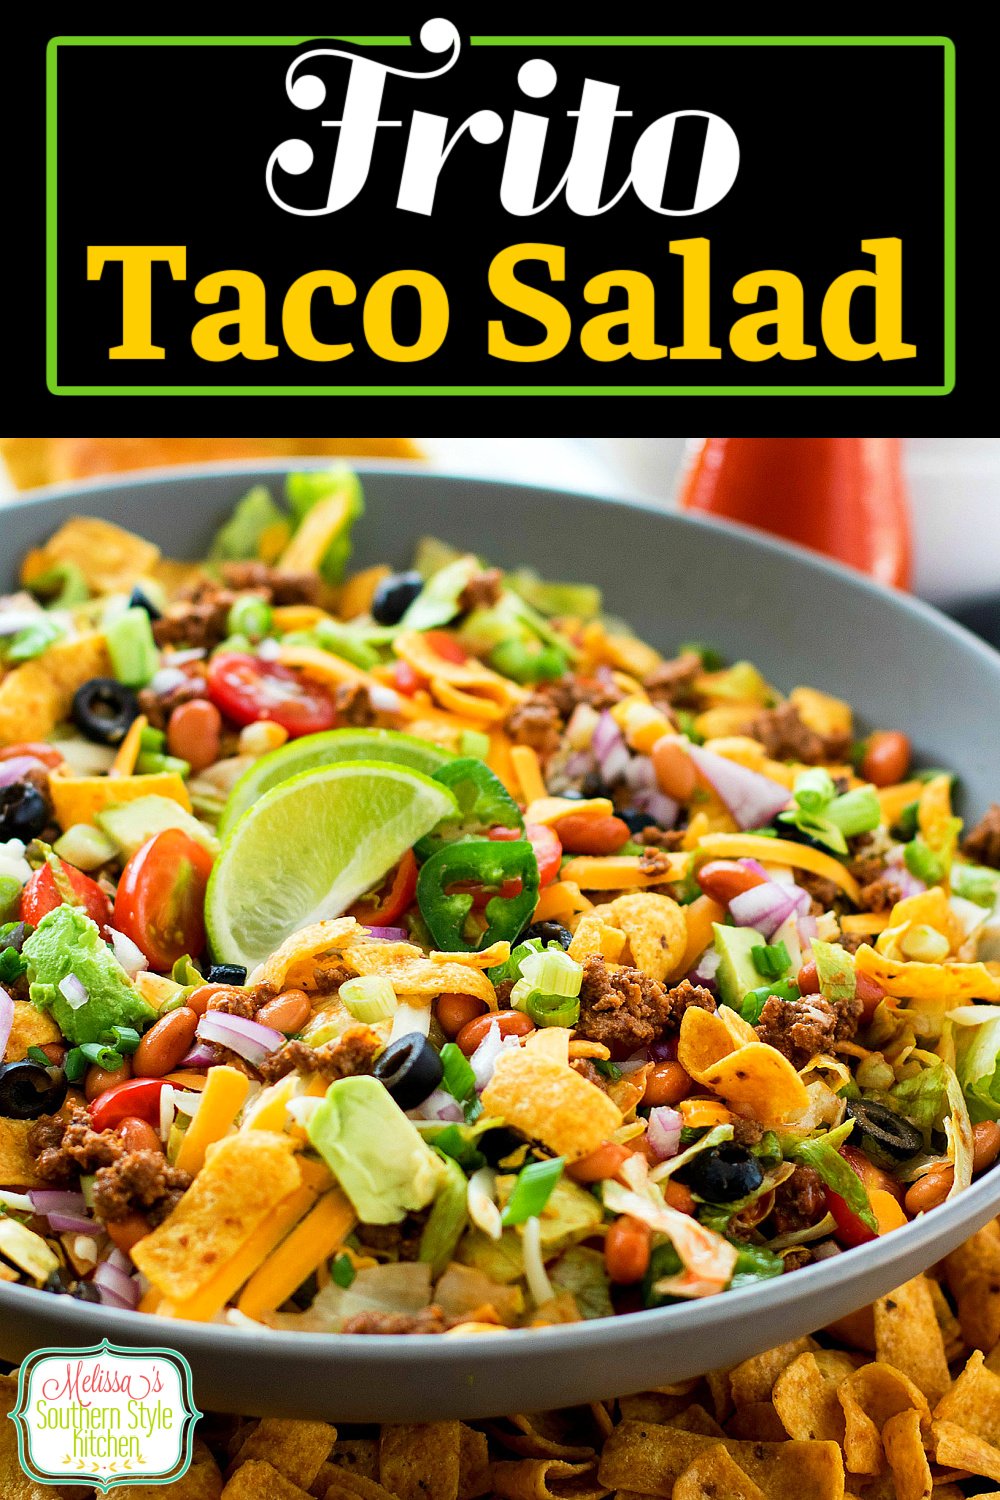 Whip-up this Frito Taco Salad for dinner and game day snacking #fritosalad #tacosalad #saladrecipes #dinnerideas #groundbeefrecipes #tacos #fritosalad #easyrecipes #southernrecipes #southernfood #melissassouthernstylekitchen via @melissasssk